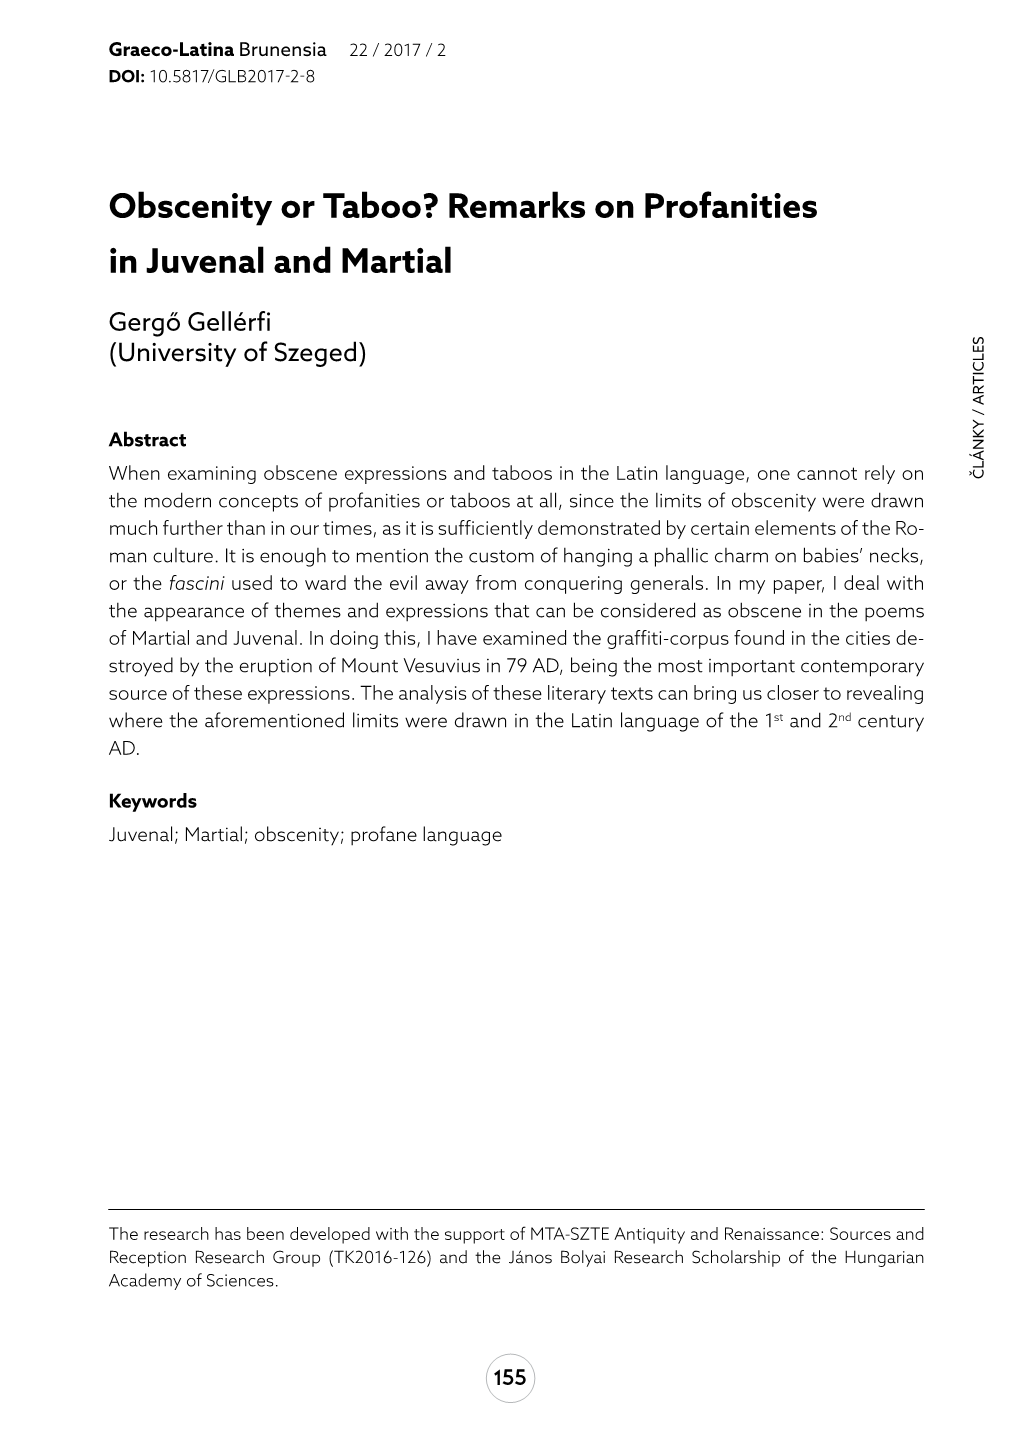 Obscenity Or Taboo? Remarks on Profanities in Juvenal and Martial